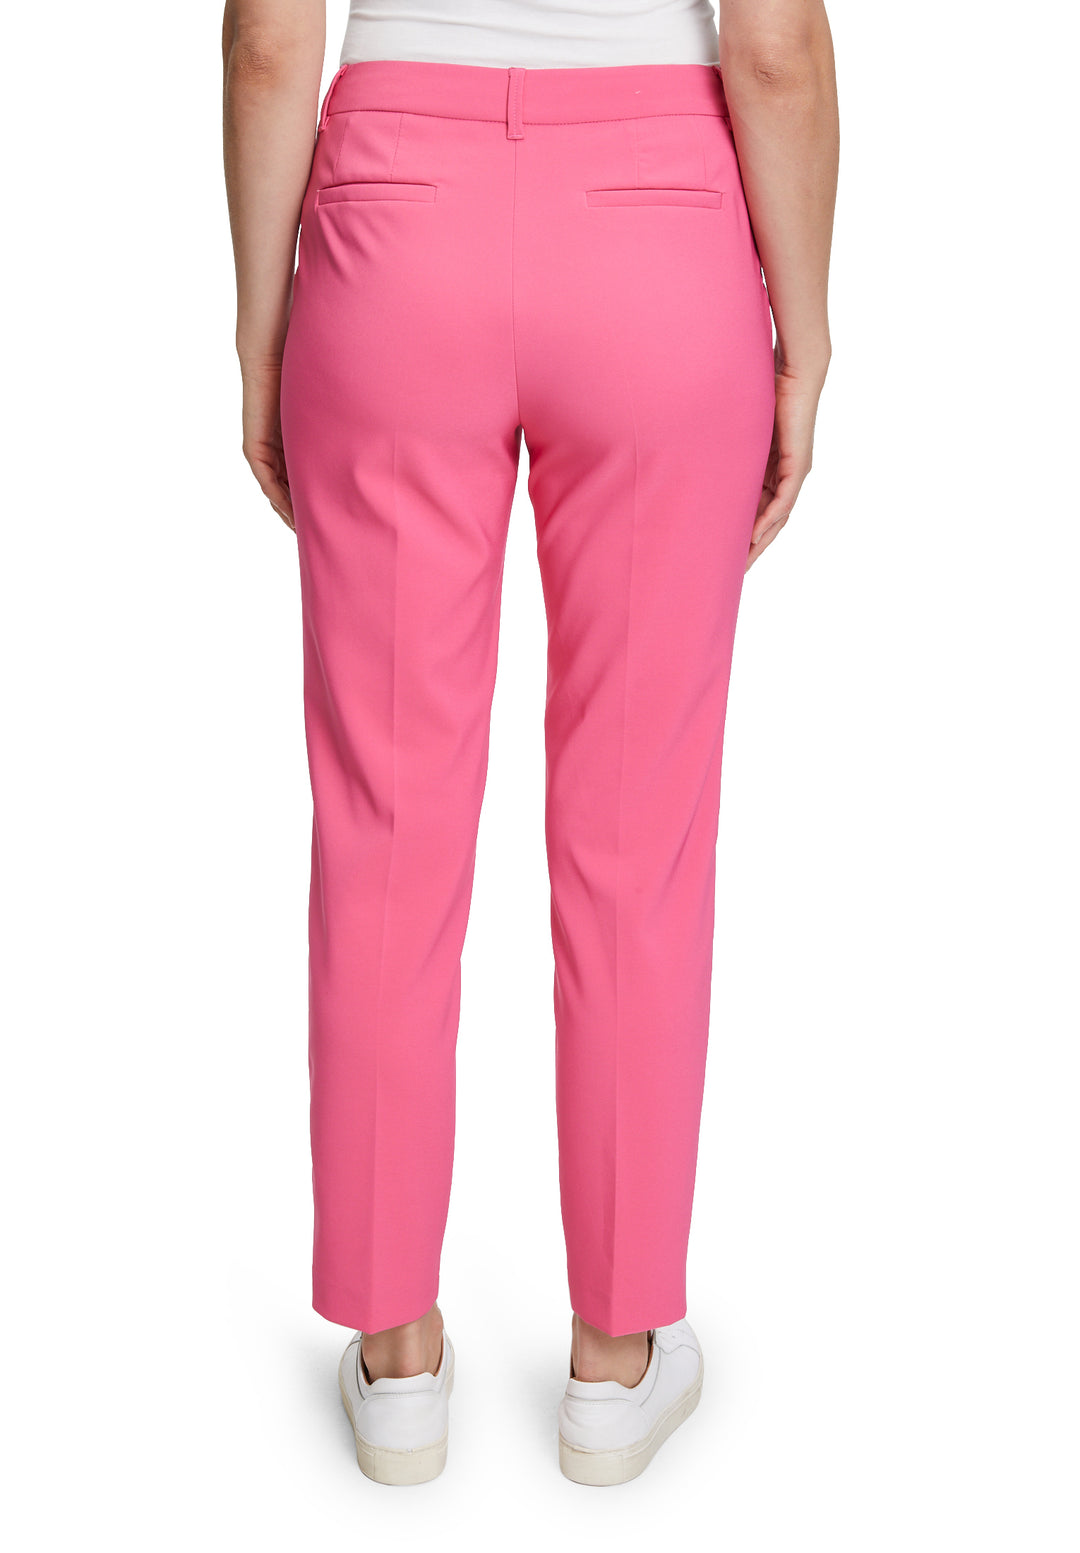 Betty Barclay 6675 1080 Classic 7/8 Length Trouser Pink 4